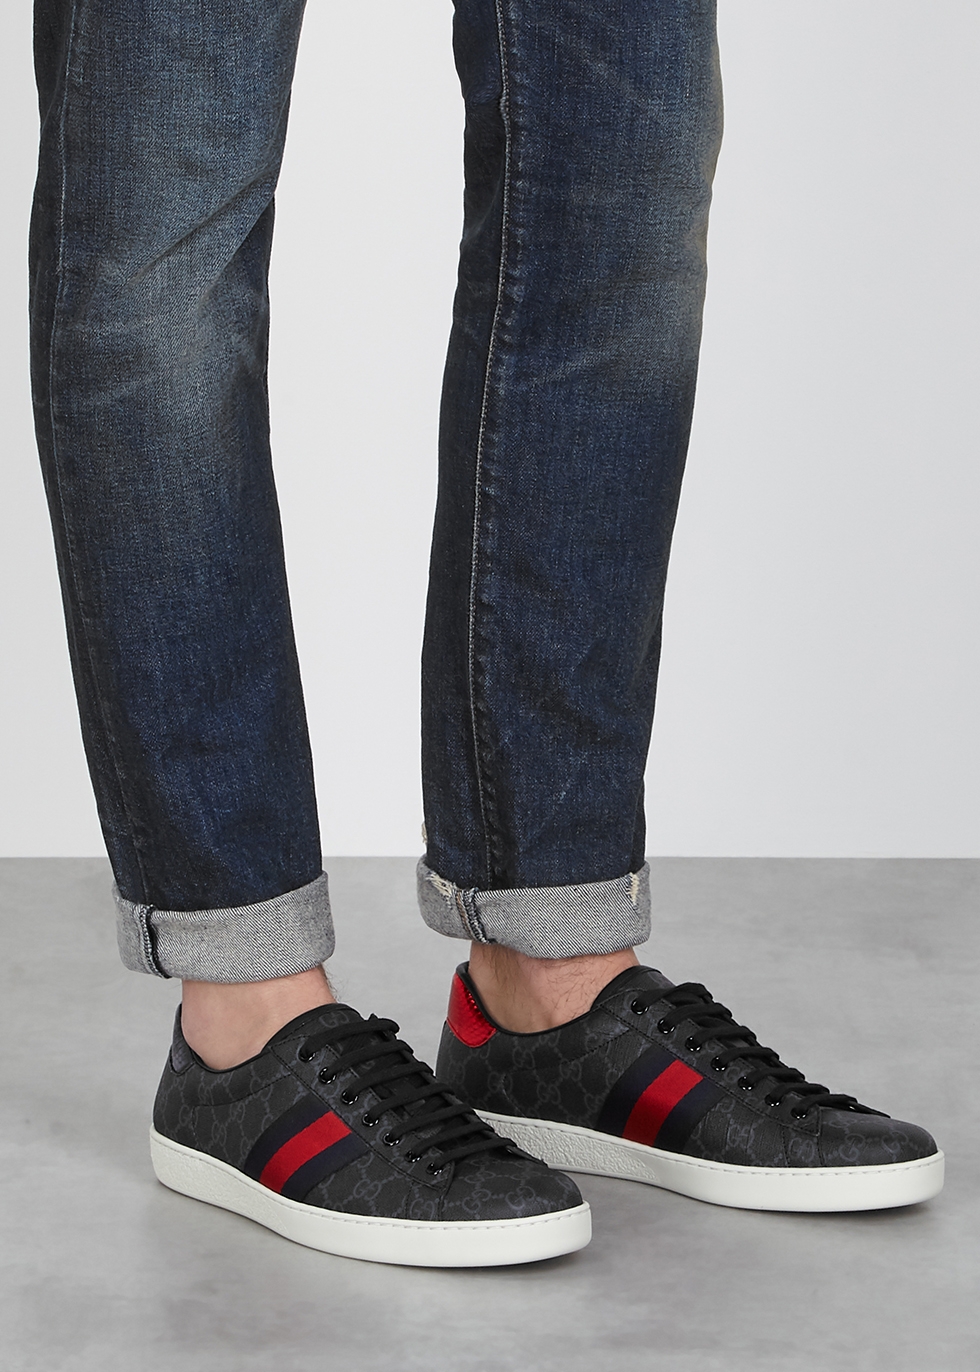 mens gucci ace trainers - 54% OFF 